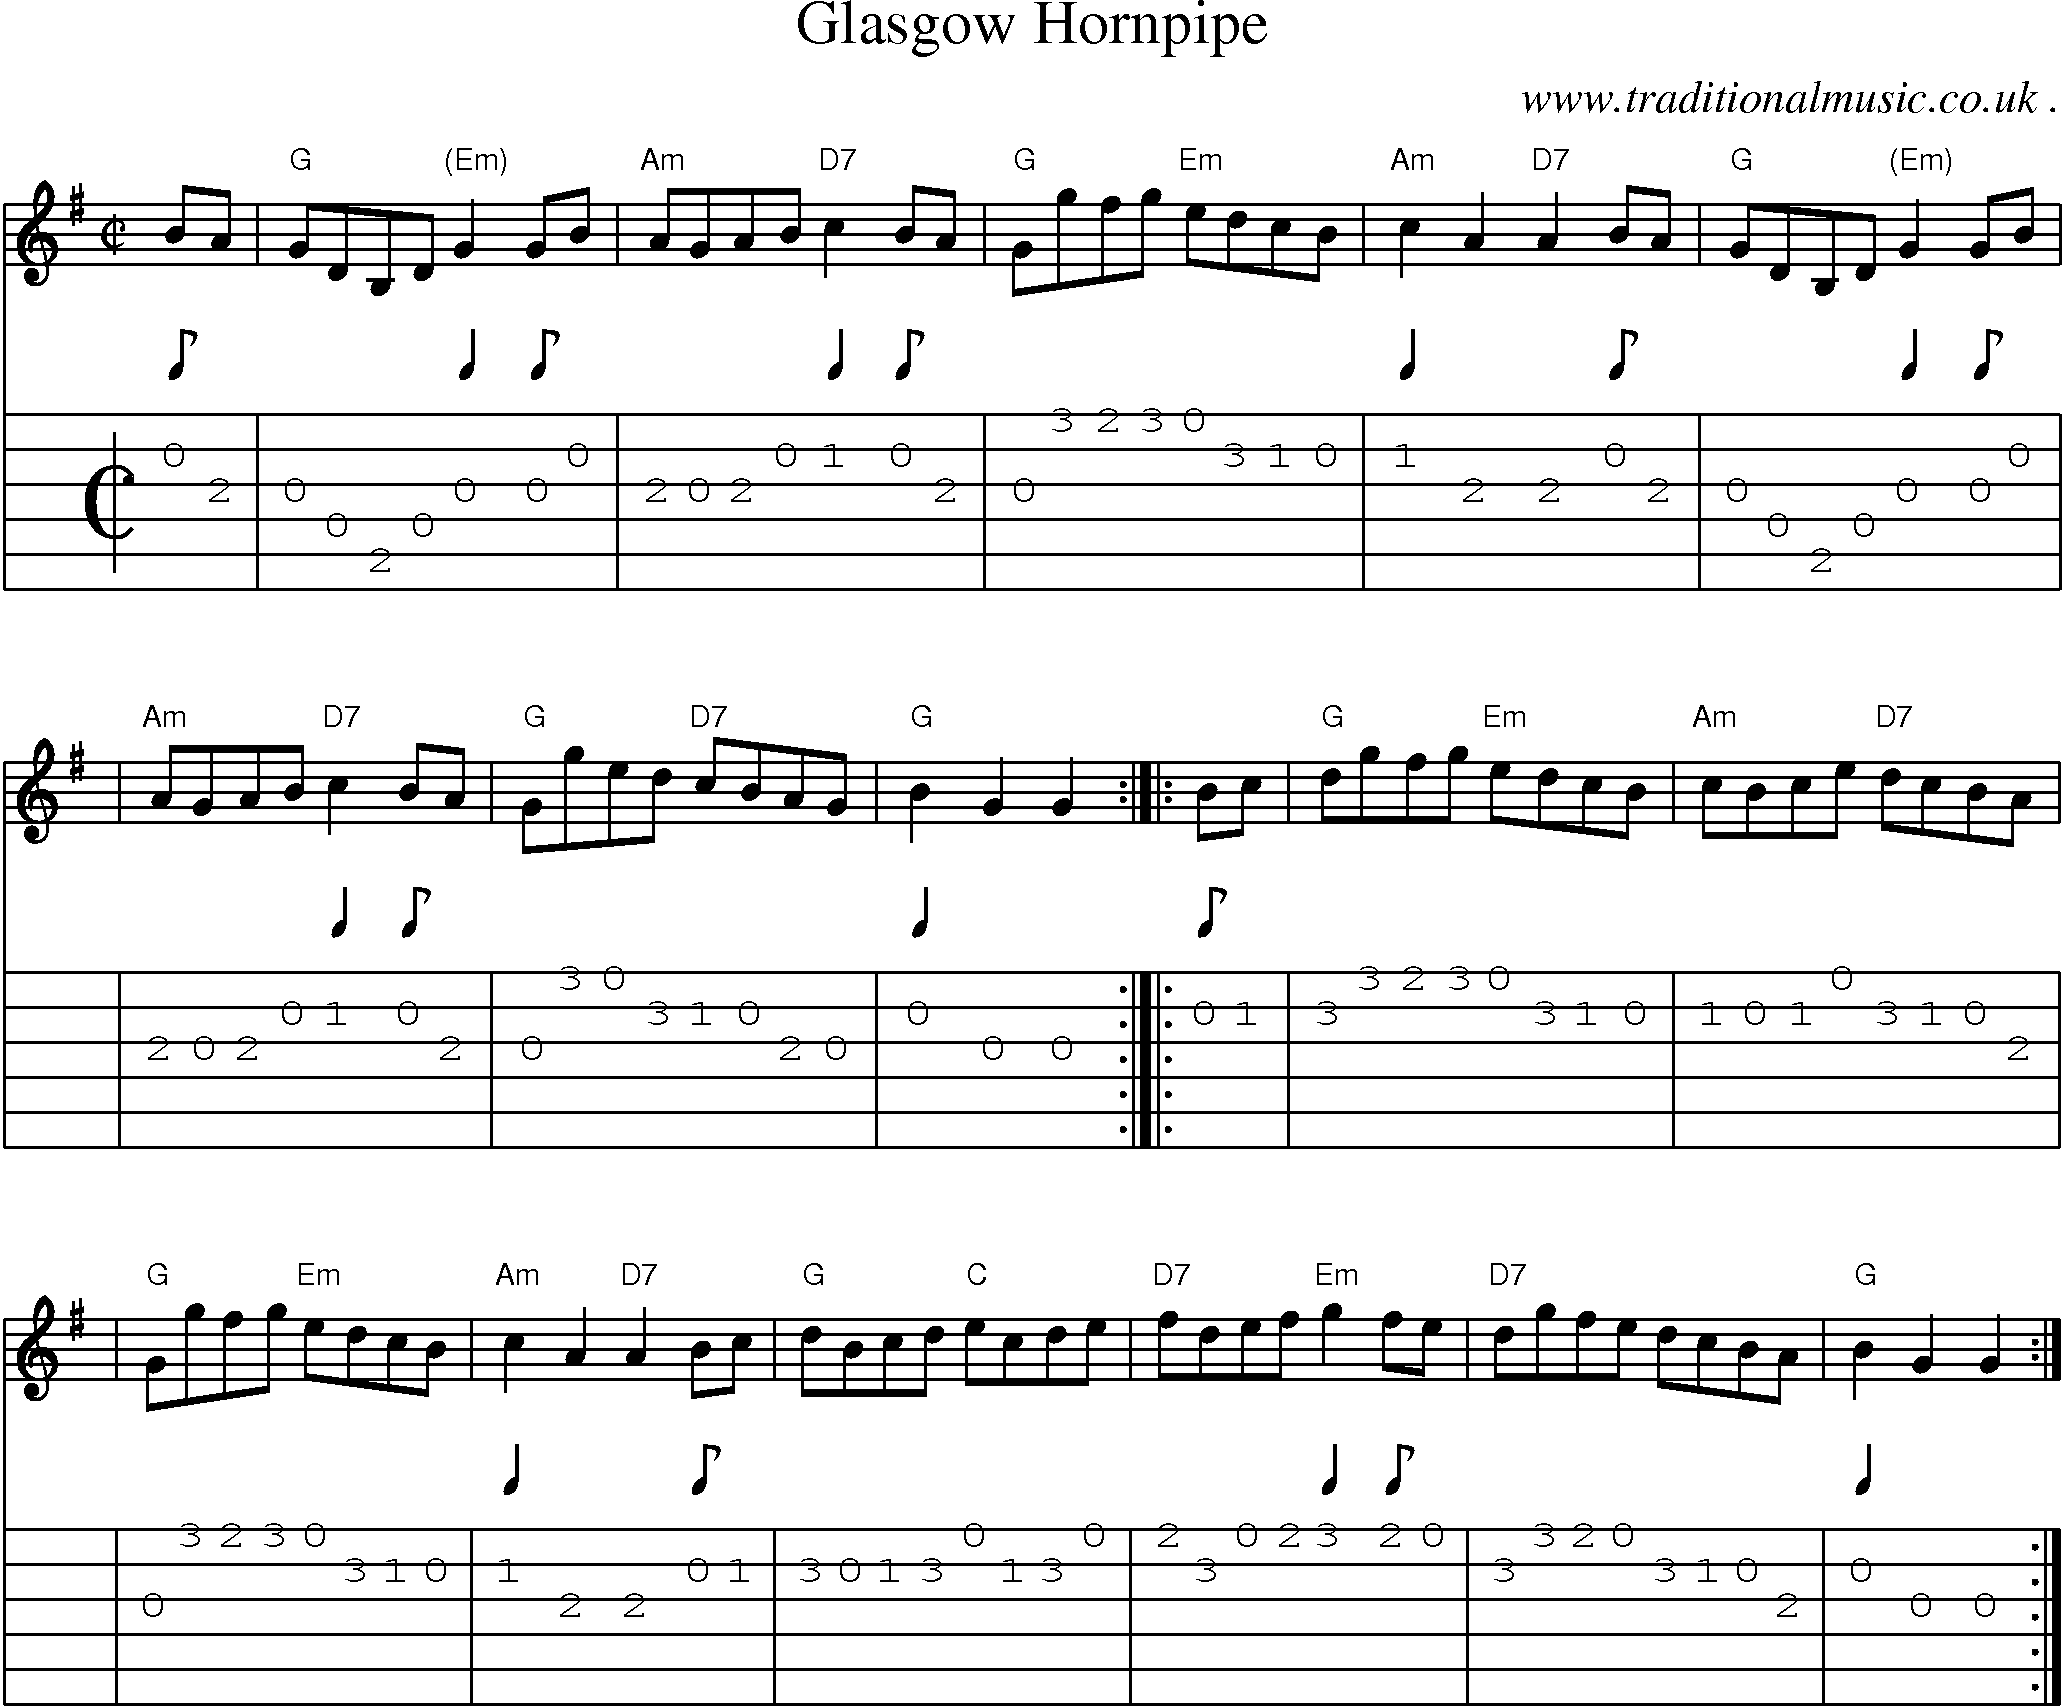 Sheet-music  score, Chords and Guitar Tabs for Glasgow Hornpipe